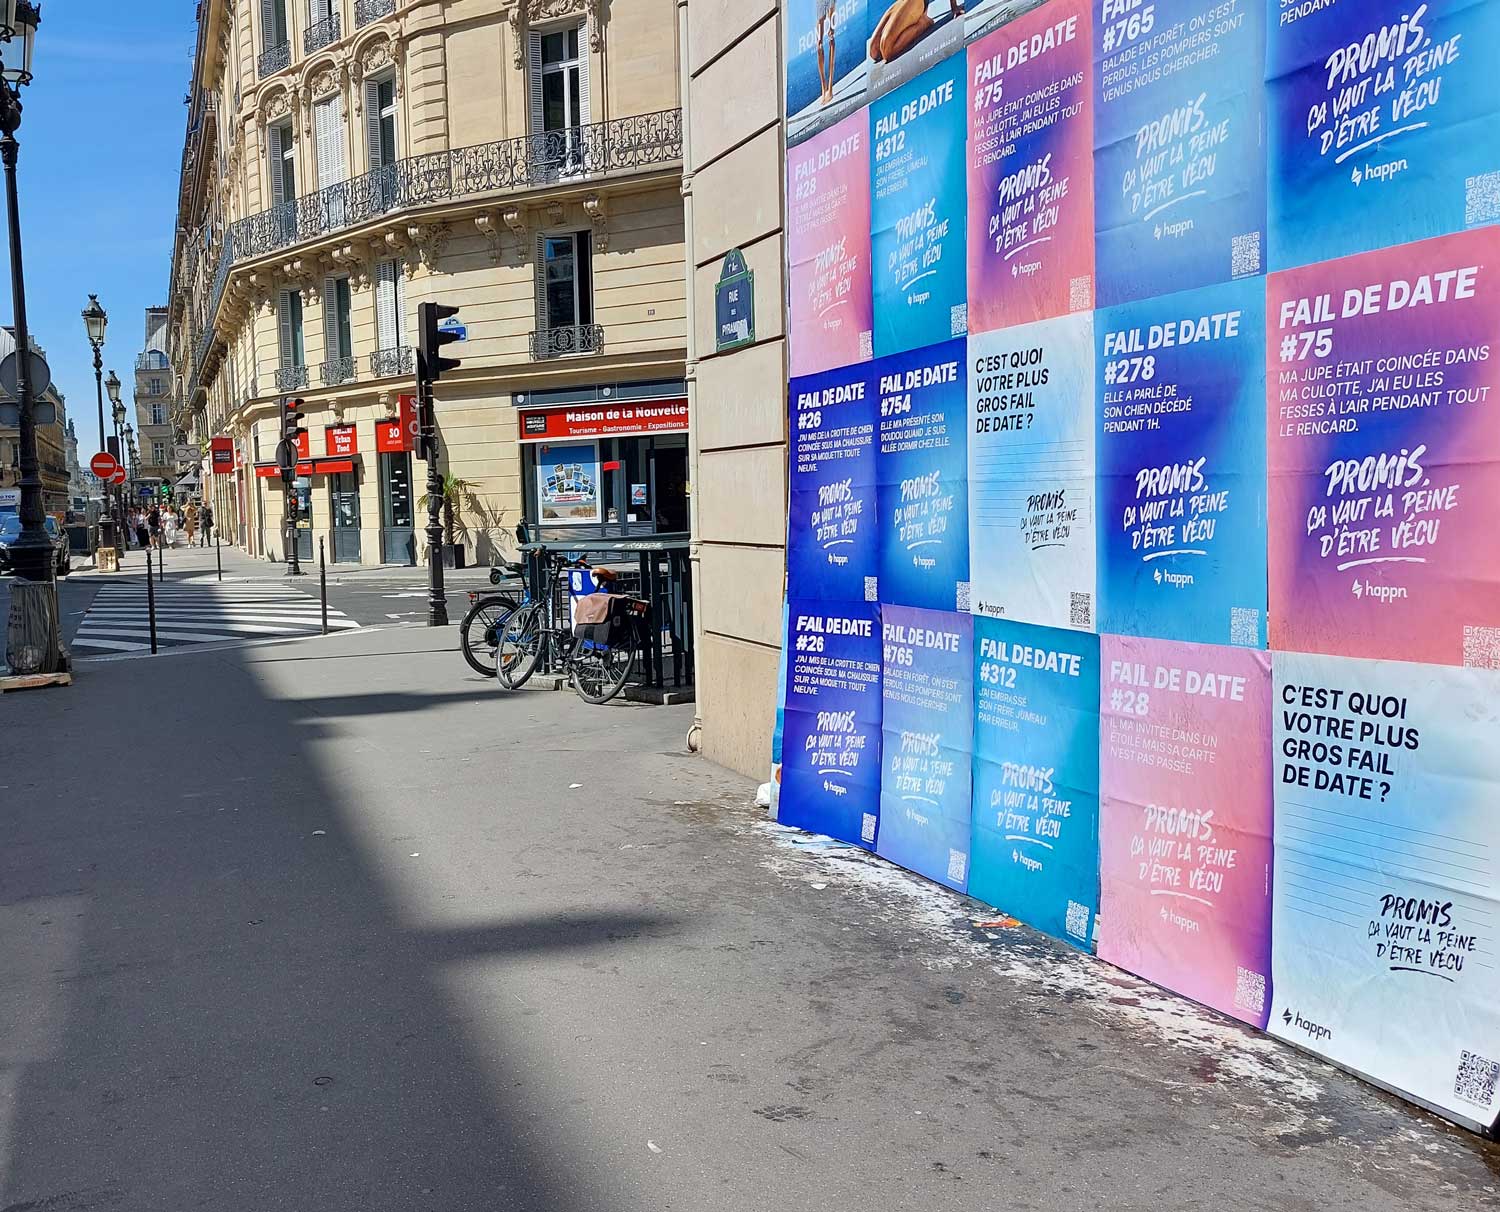 Happn-affichage-sauvage-tapage-medias-street-guerilla-marketing-campagne-publicitaire-france